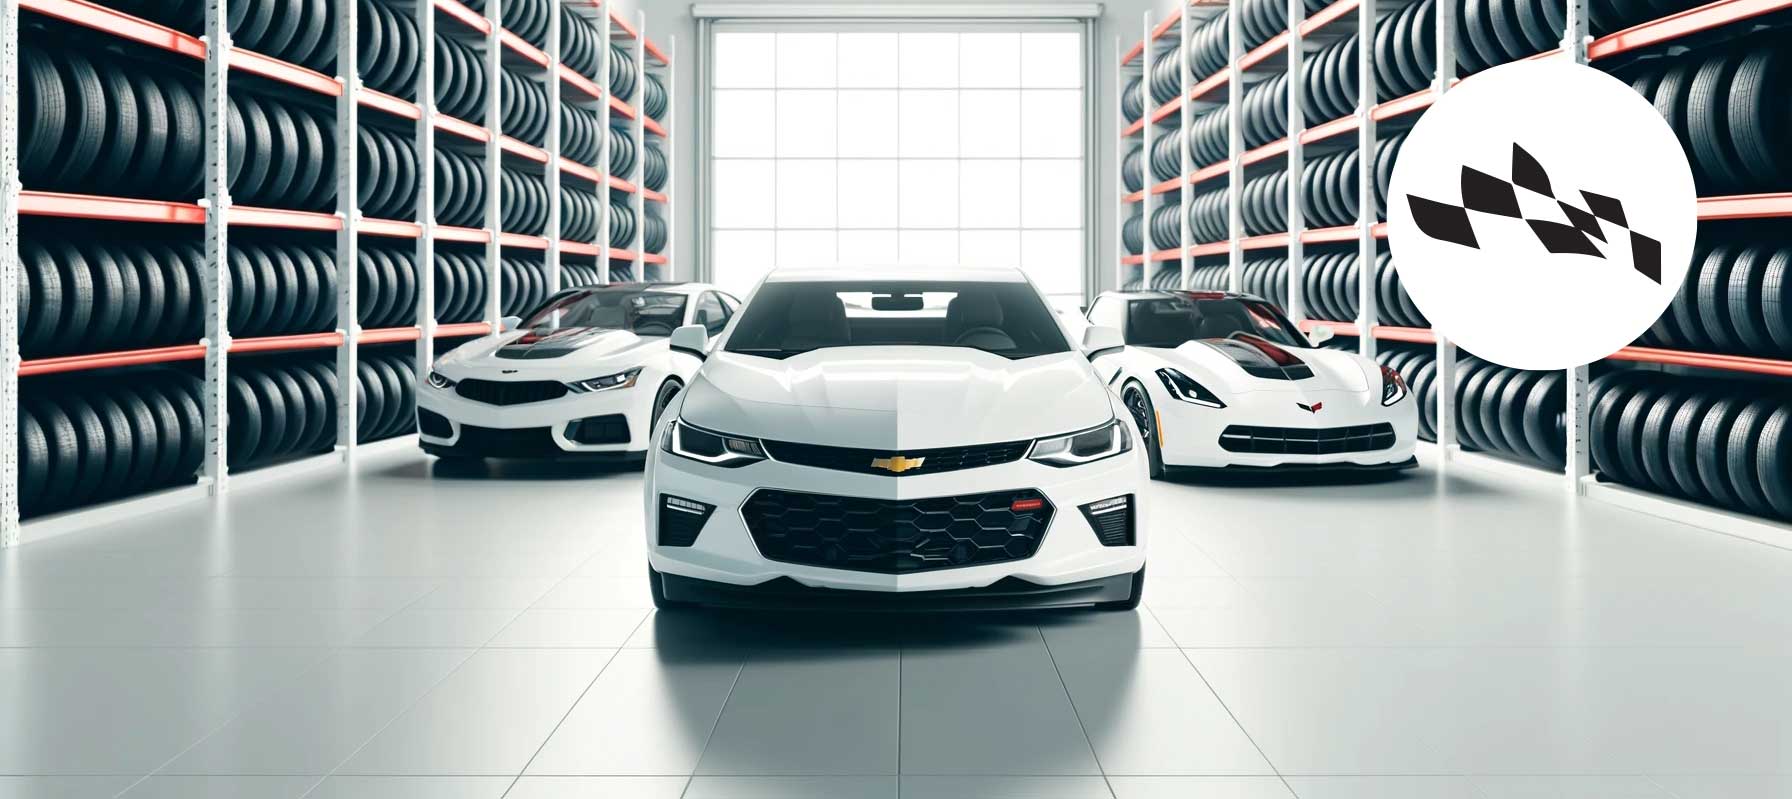 Chevy tires warehouse image